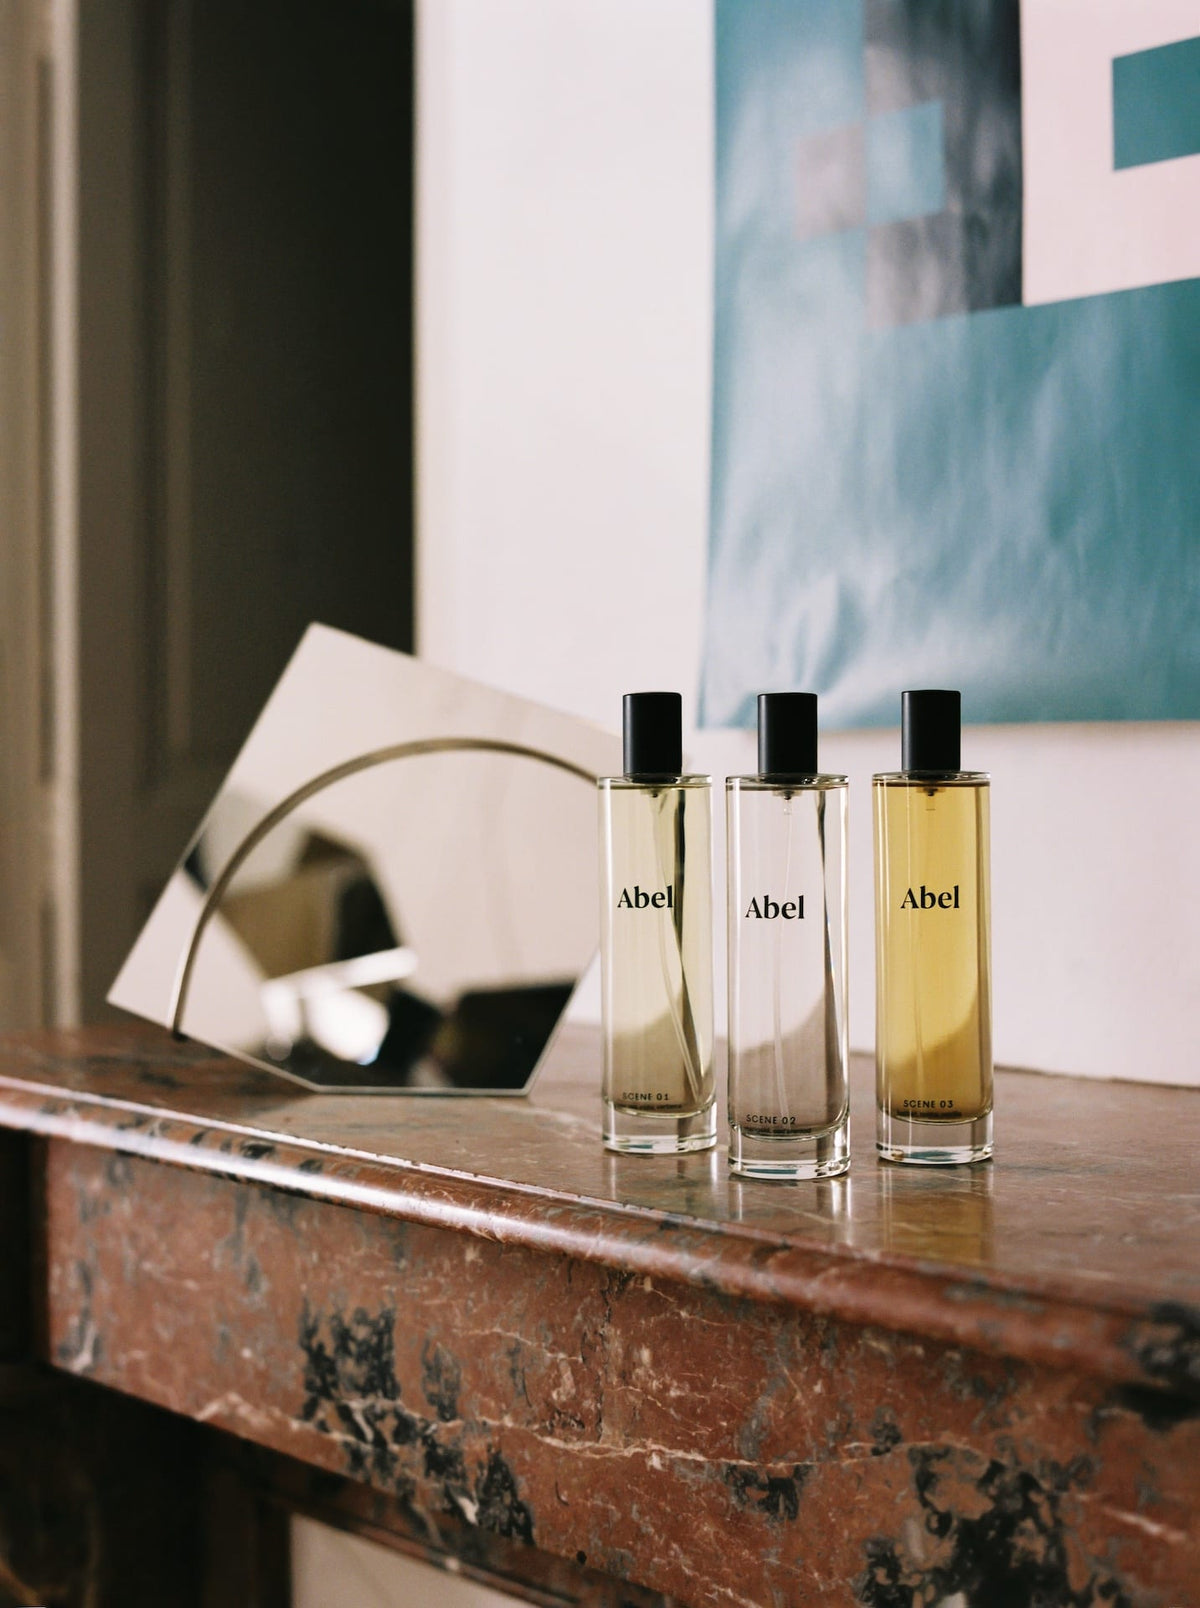 Three bottles of Abel Room Spray – Scene 03 ⋅ leather, tonka, vanilla crafted from natural ingredients on a wooden mantelpiece with a round mirror in the background.